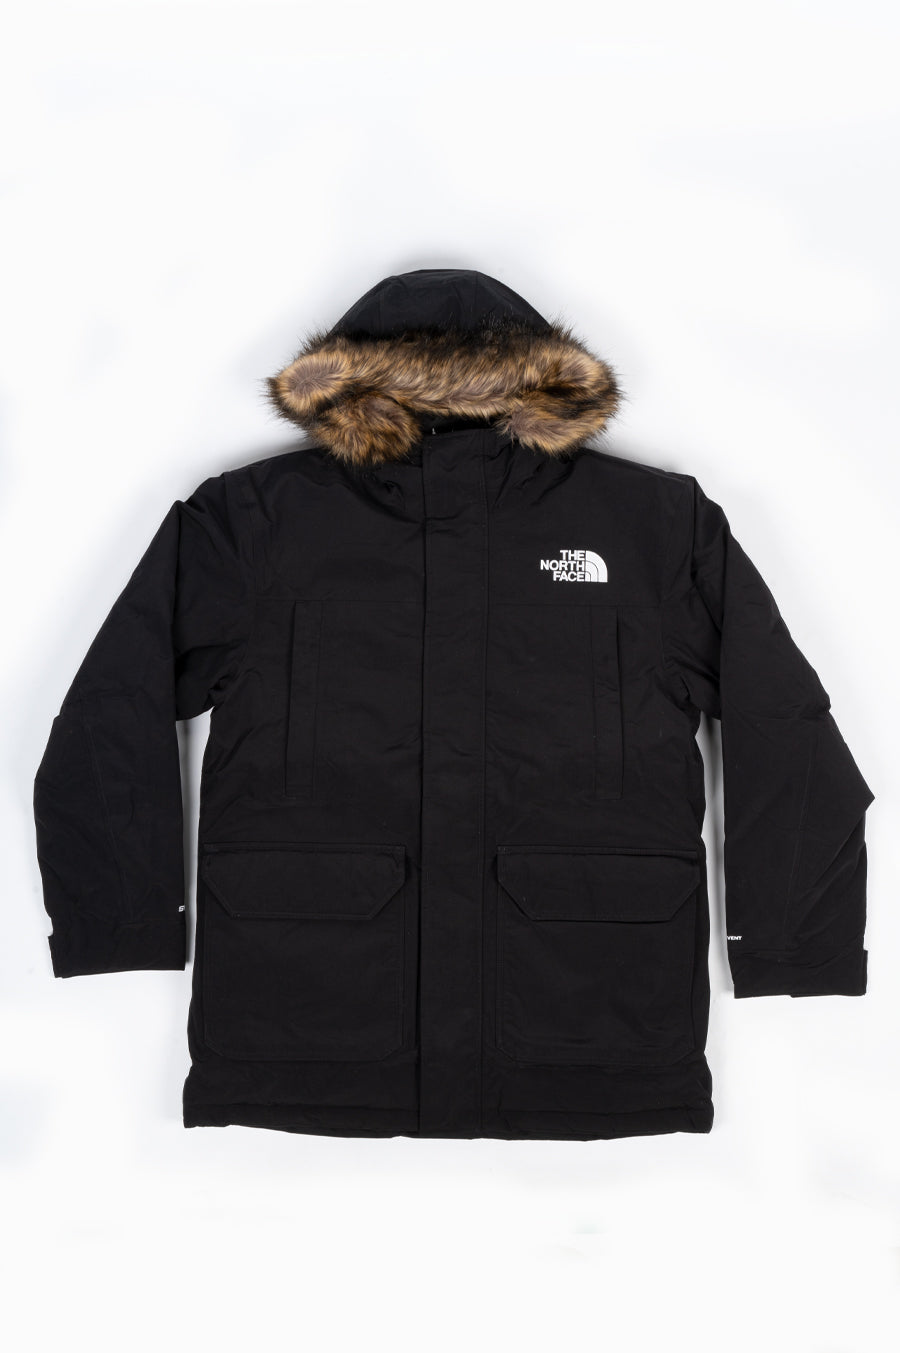 THE NORTH FACE MCMURDO PARKA – BLENDS